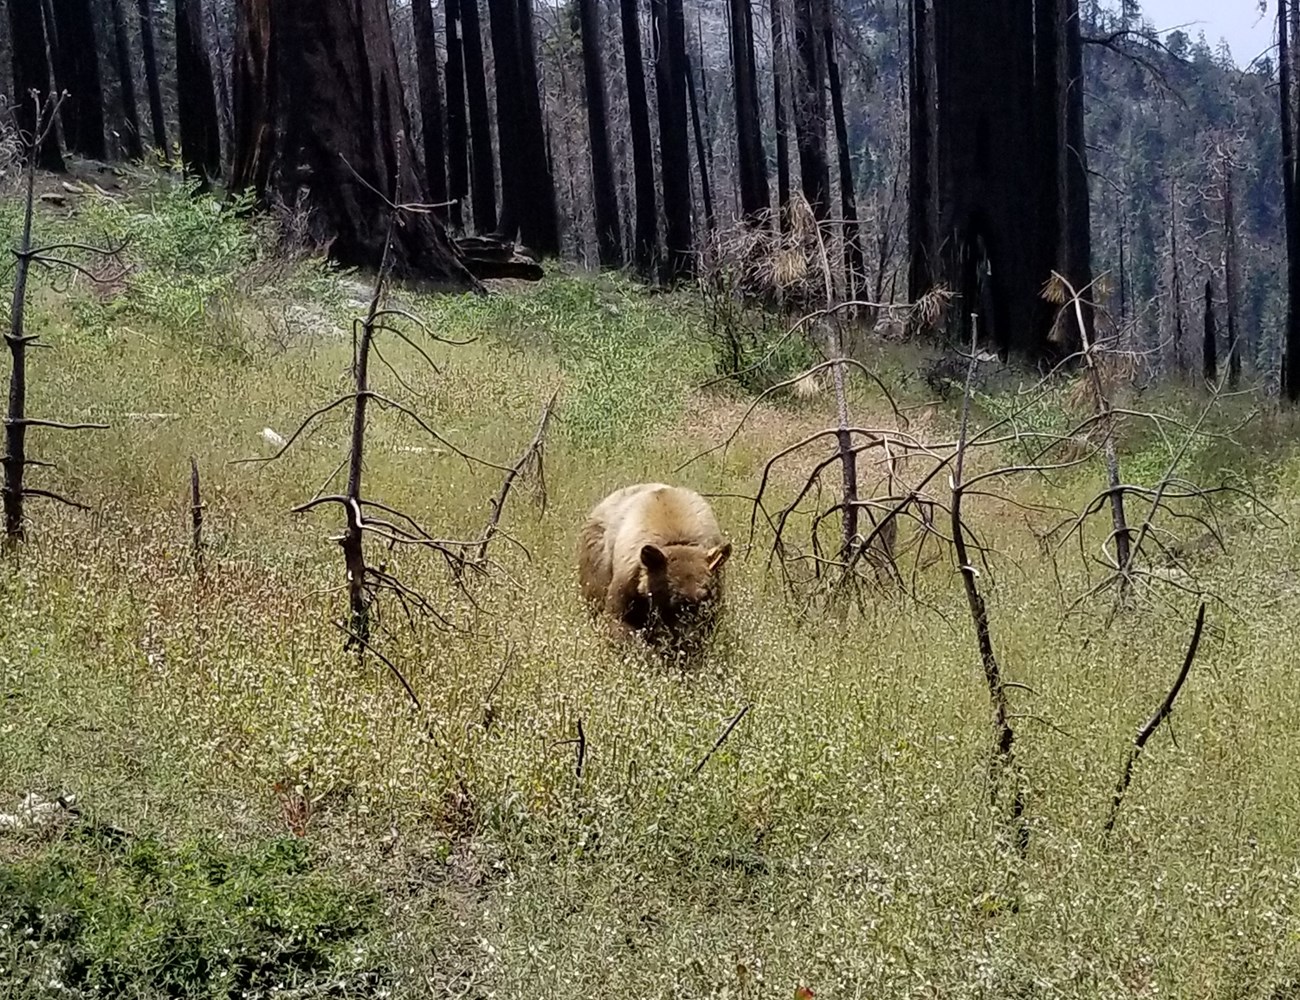 Large brown-colored bear has its head in tall plants as it feeds on caterpillars.